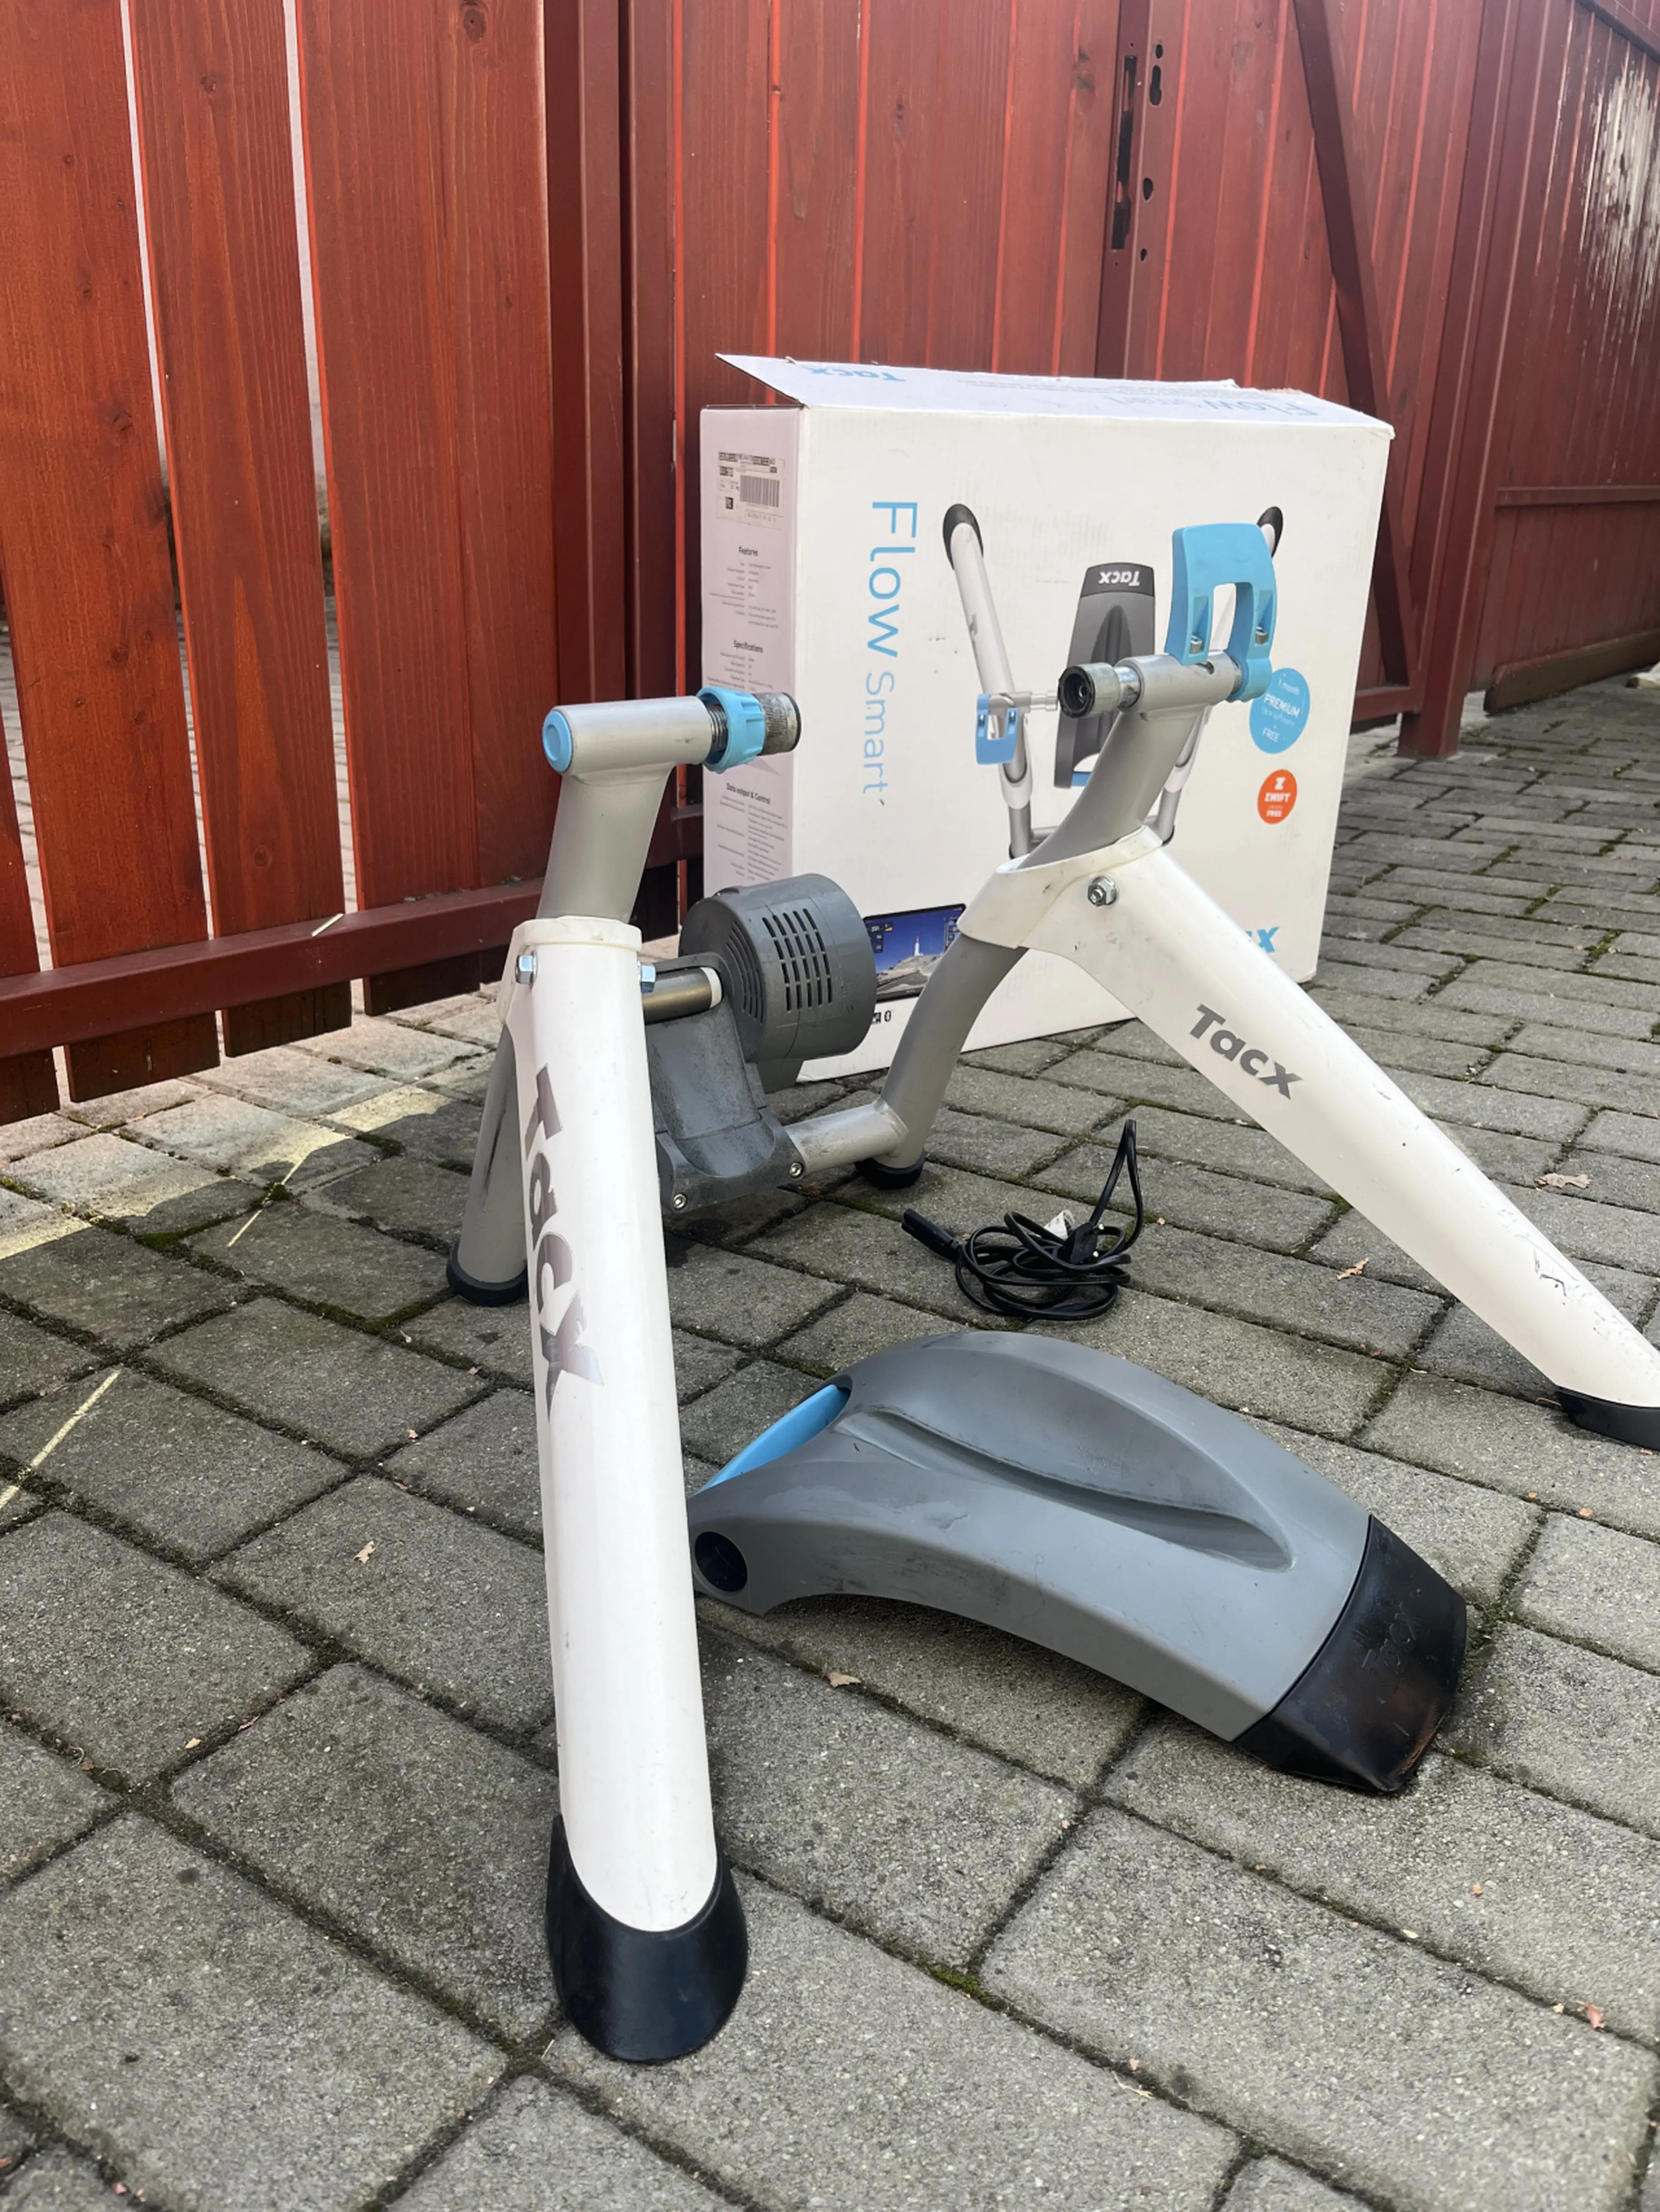 2. Home Trainer Tacx Flow Smart